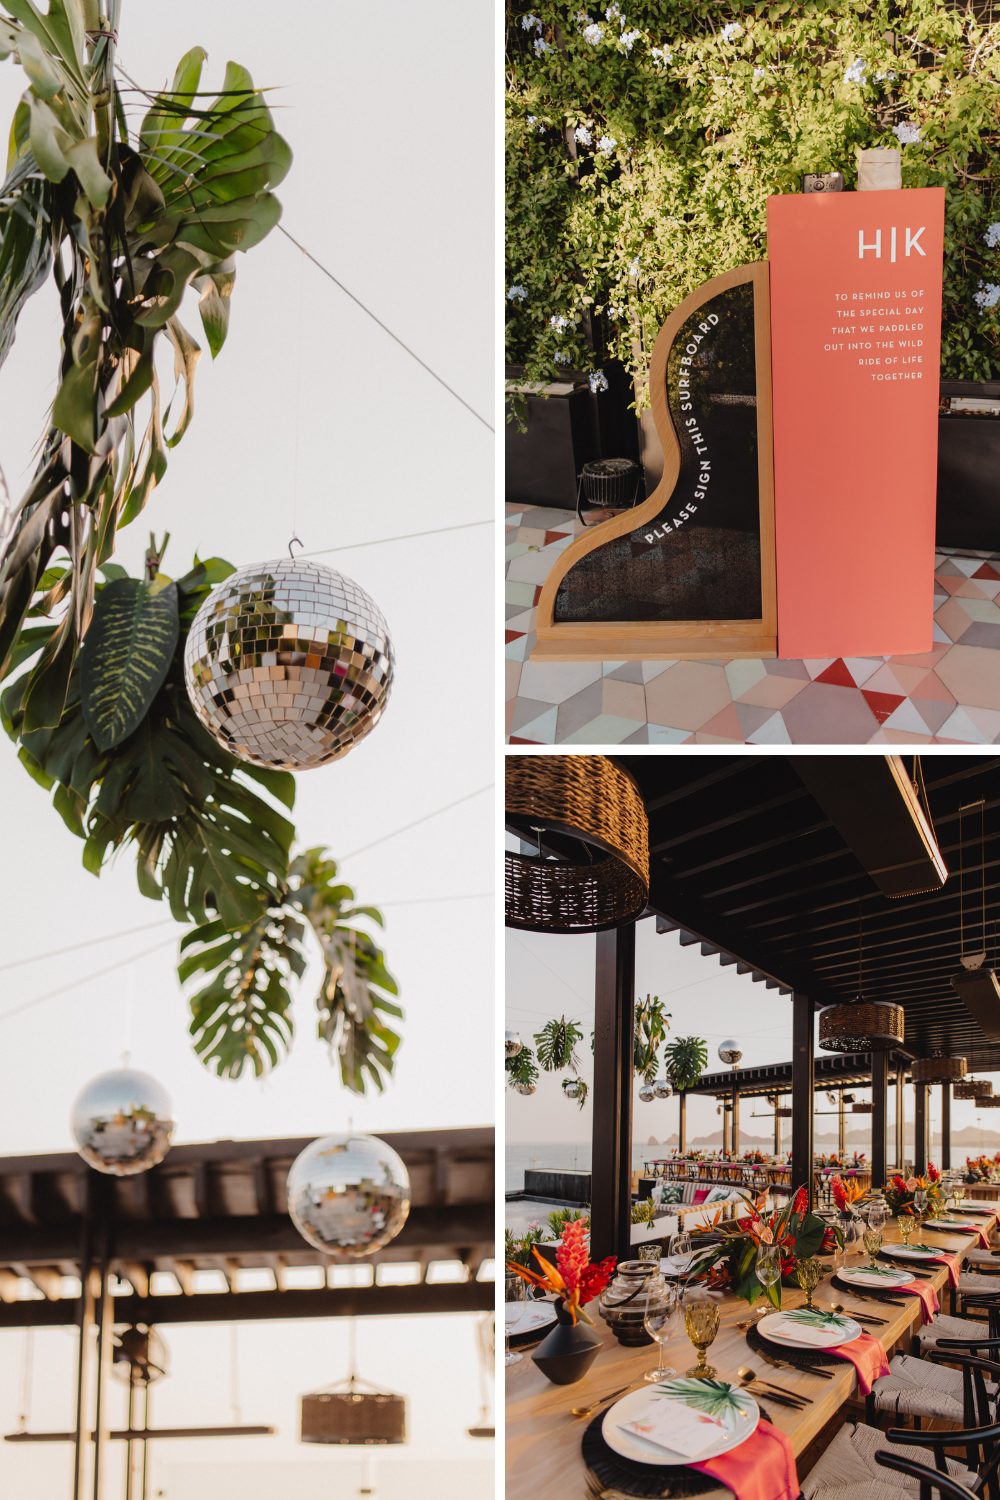 disco balls and palm fronds hung on thin wire, unique sign prompting guests to sign the "guest book" surf board, table set up with tropical decor